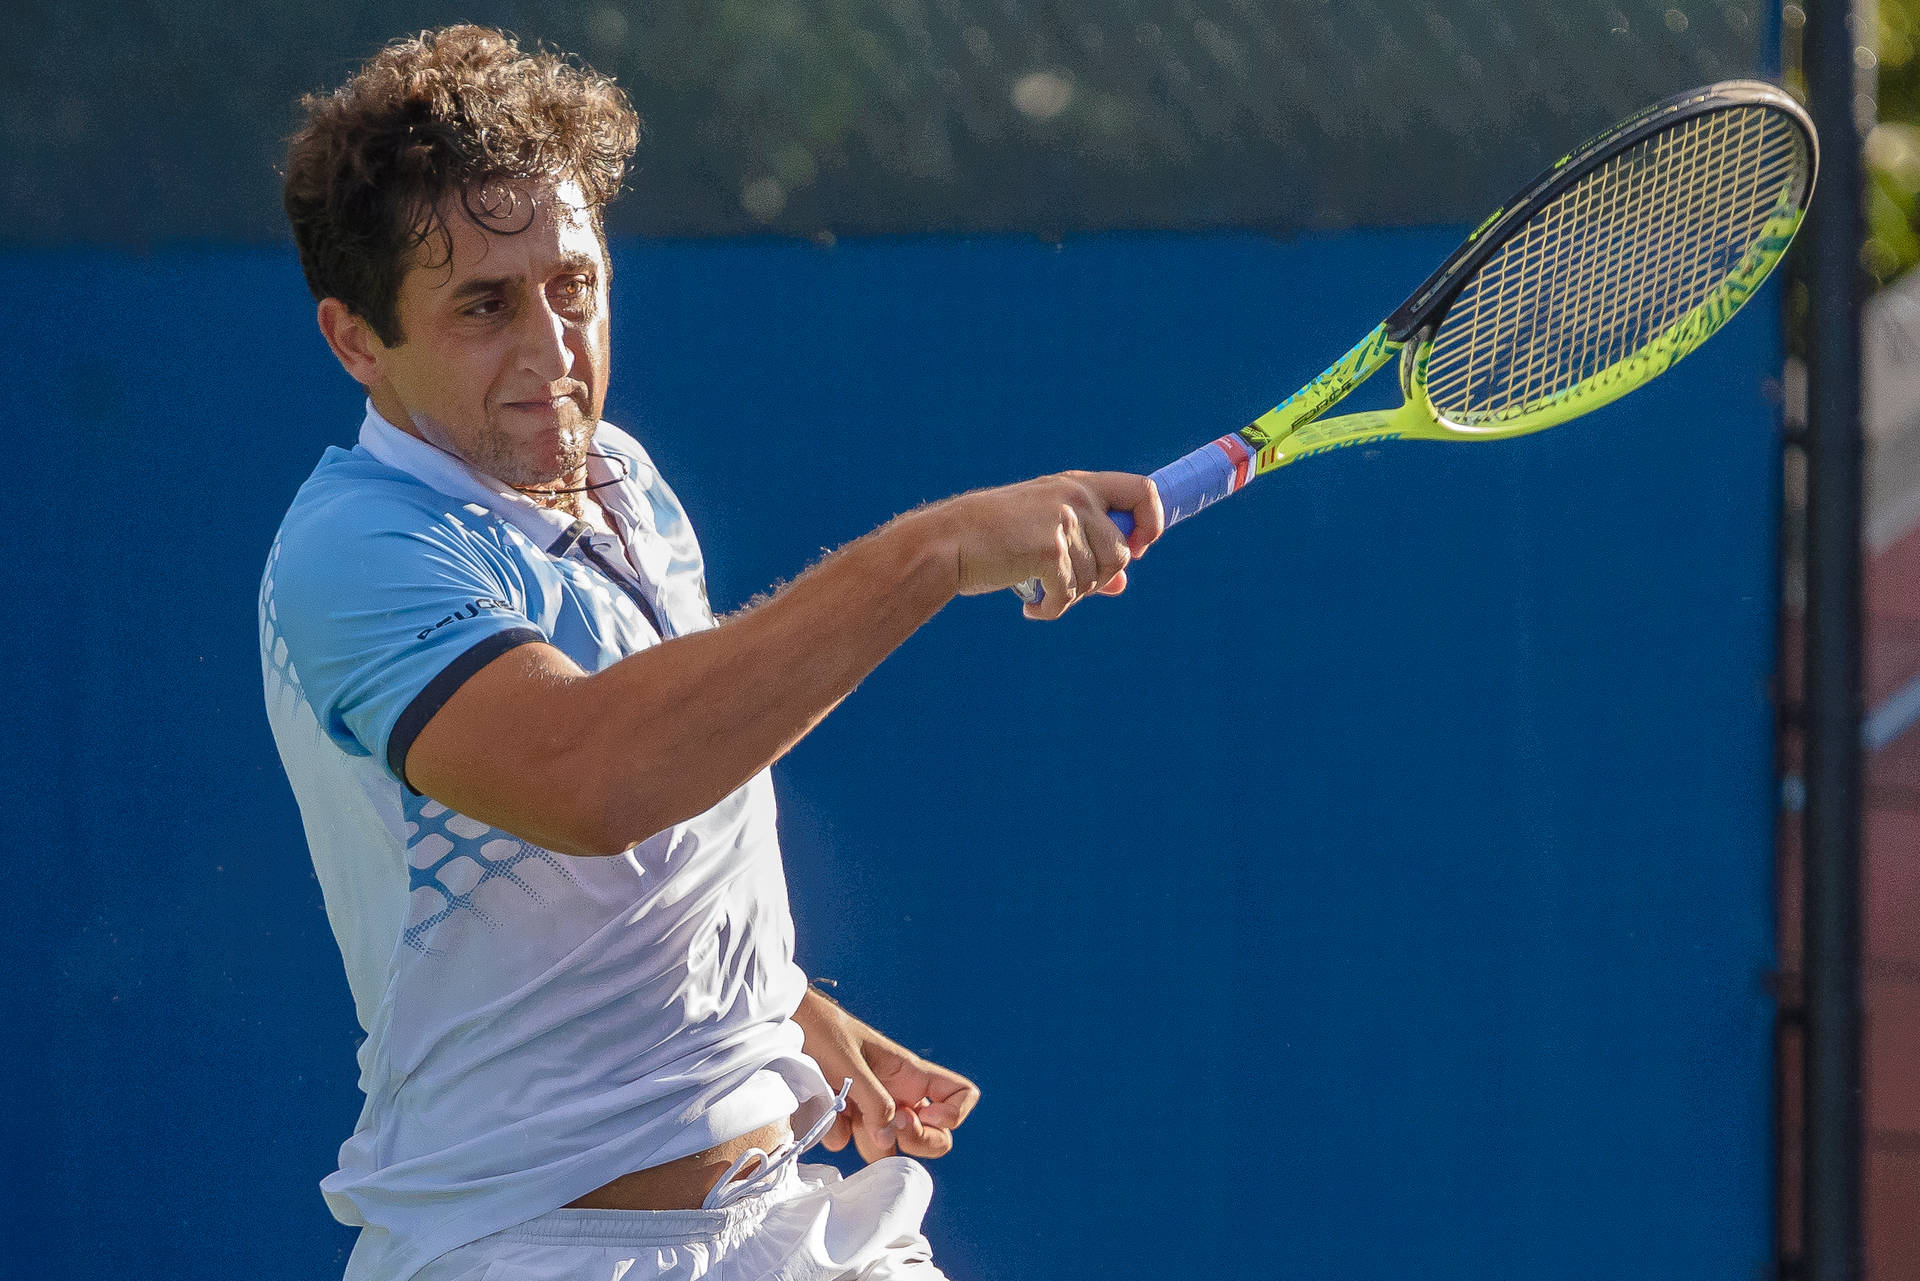 Caption: Nicolas Almagro Exhausted but Satisfied After a Rigorous Tennis Match Wallpaper